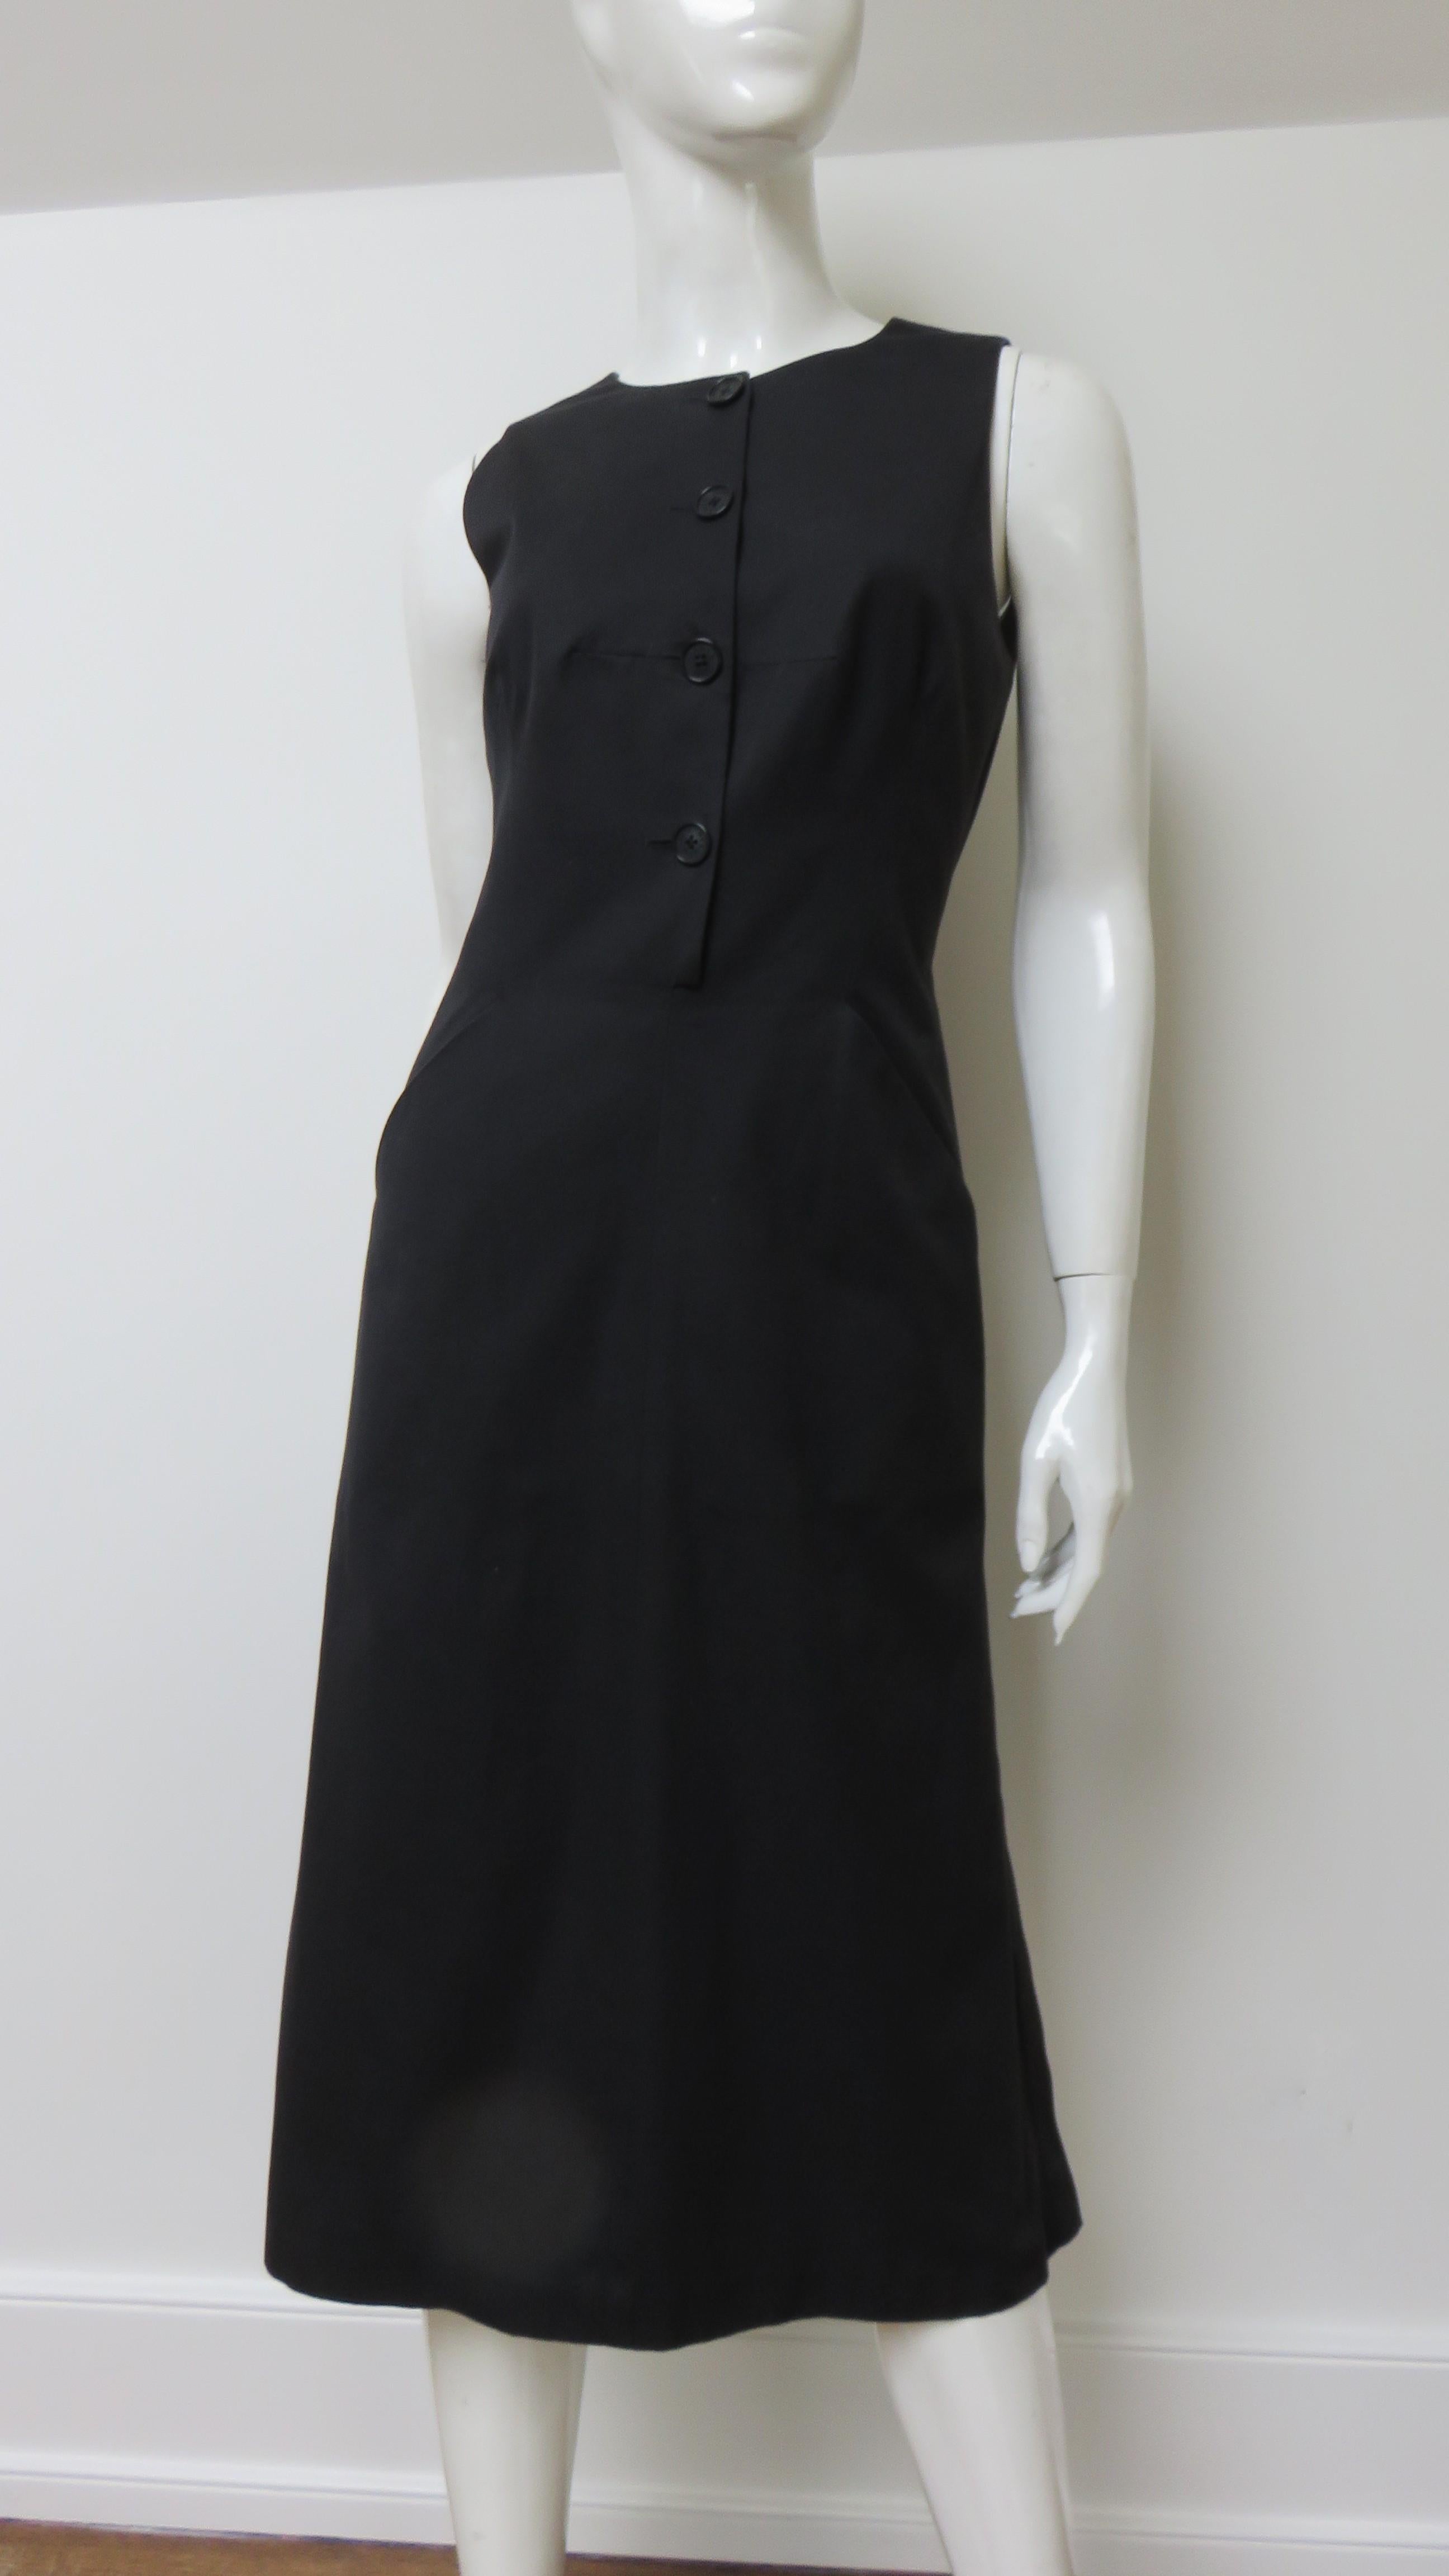 A fabulous black polished cotton dress from Hermes.  It is sleeveless with a crew neckline, button front closure to the waist, hip pockets, and a cut out back with adjustable lacing crossing it. The flare skirt has functional button closures at the